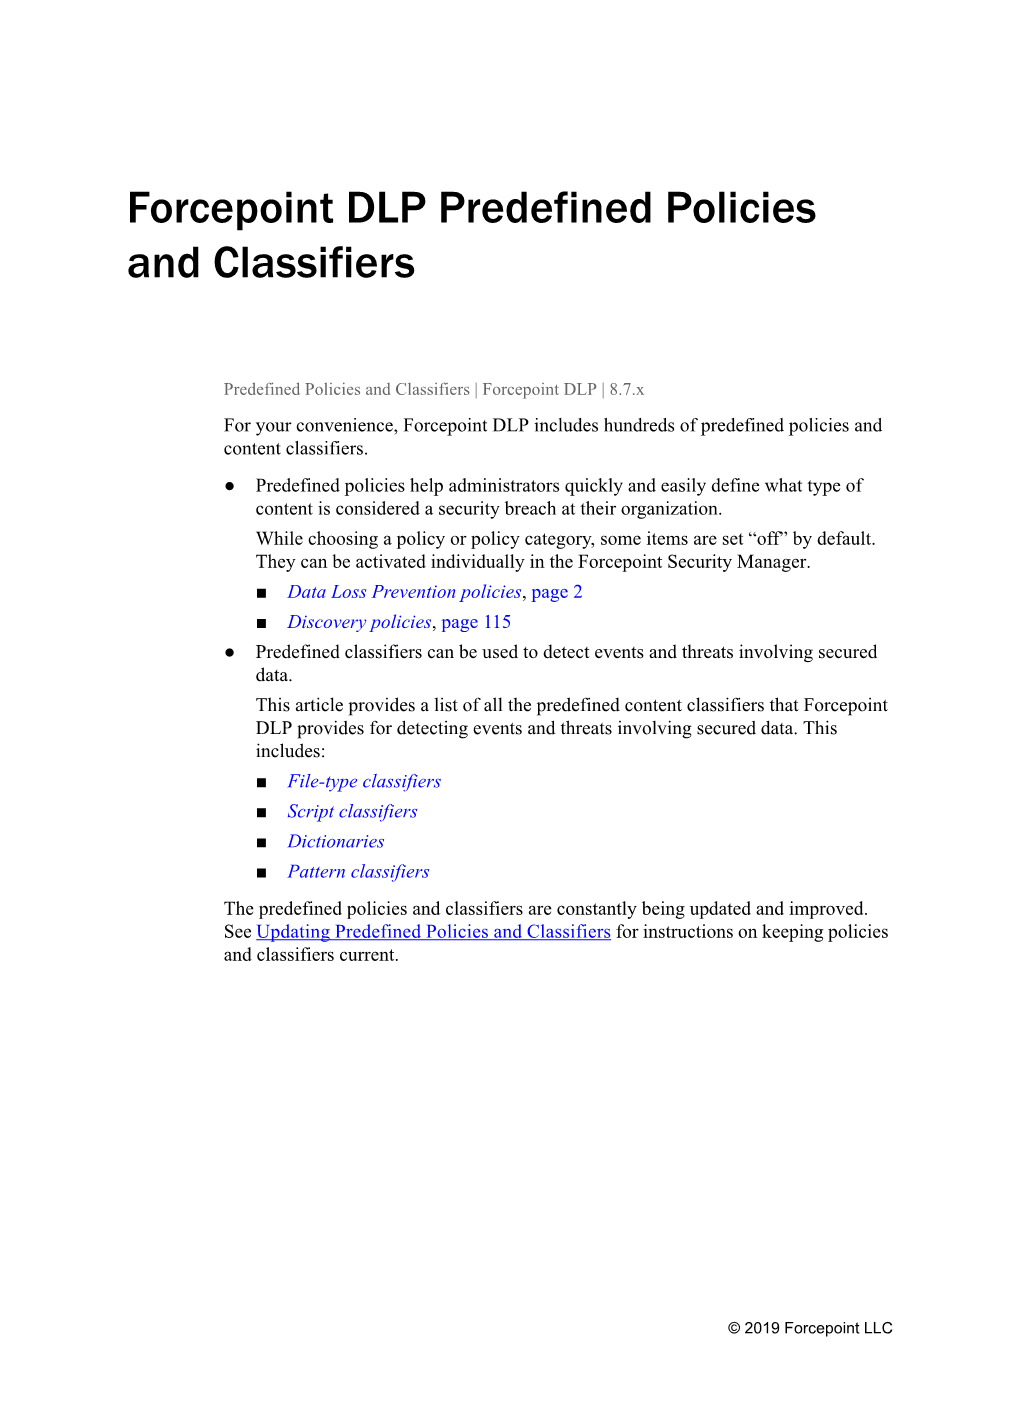 Forcepoint DLP Predefined Policies and Classifiers